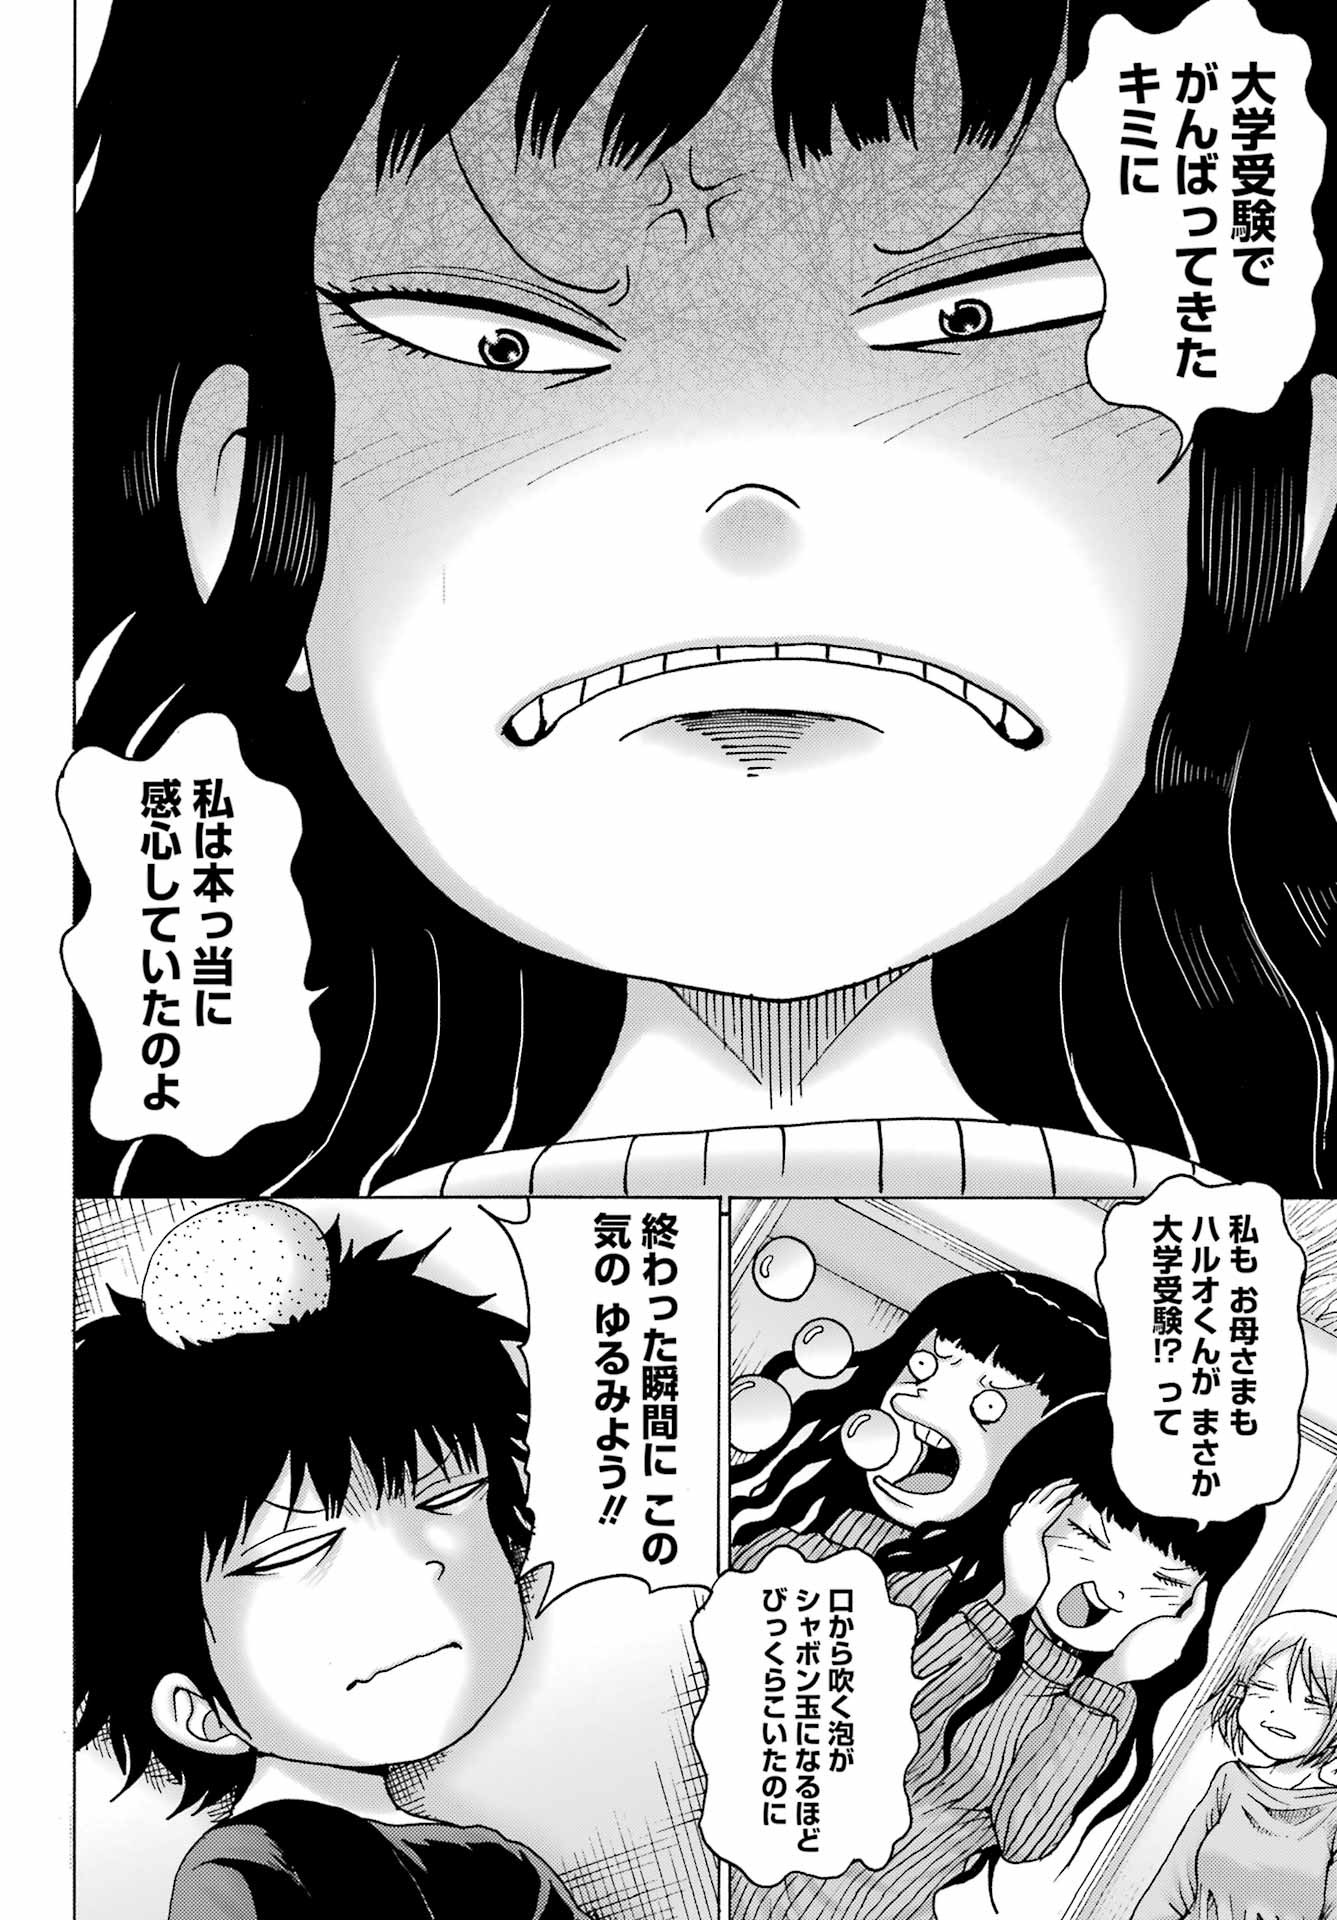 High Score Girl DASH - Chapter 27 - Page 2